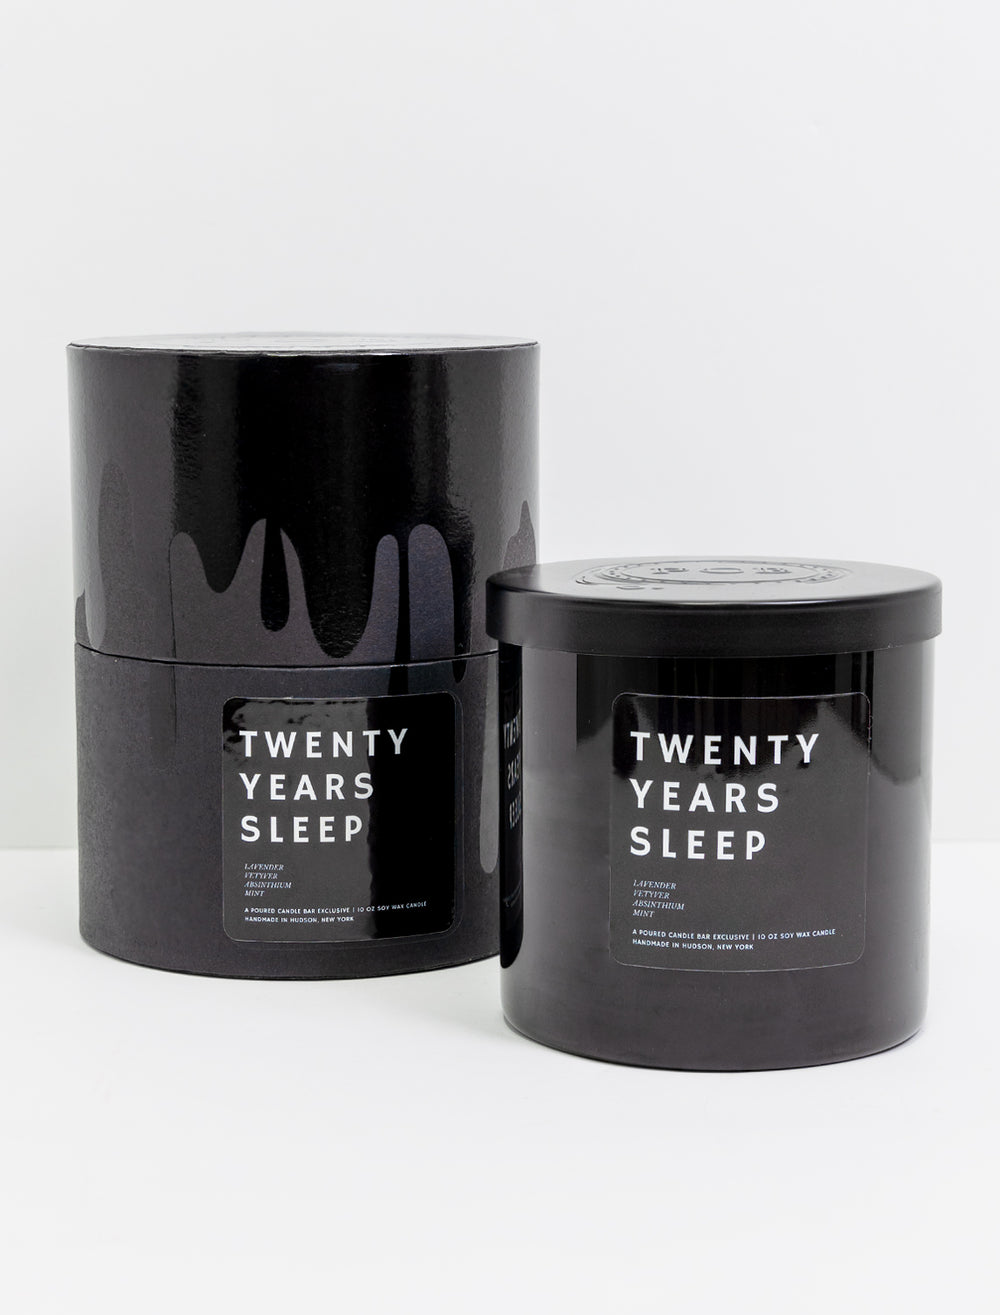 Poured Candle Bar's twenty years sleep candle and packaging.